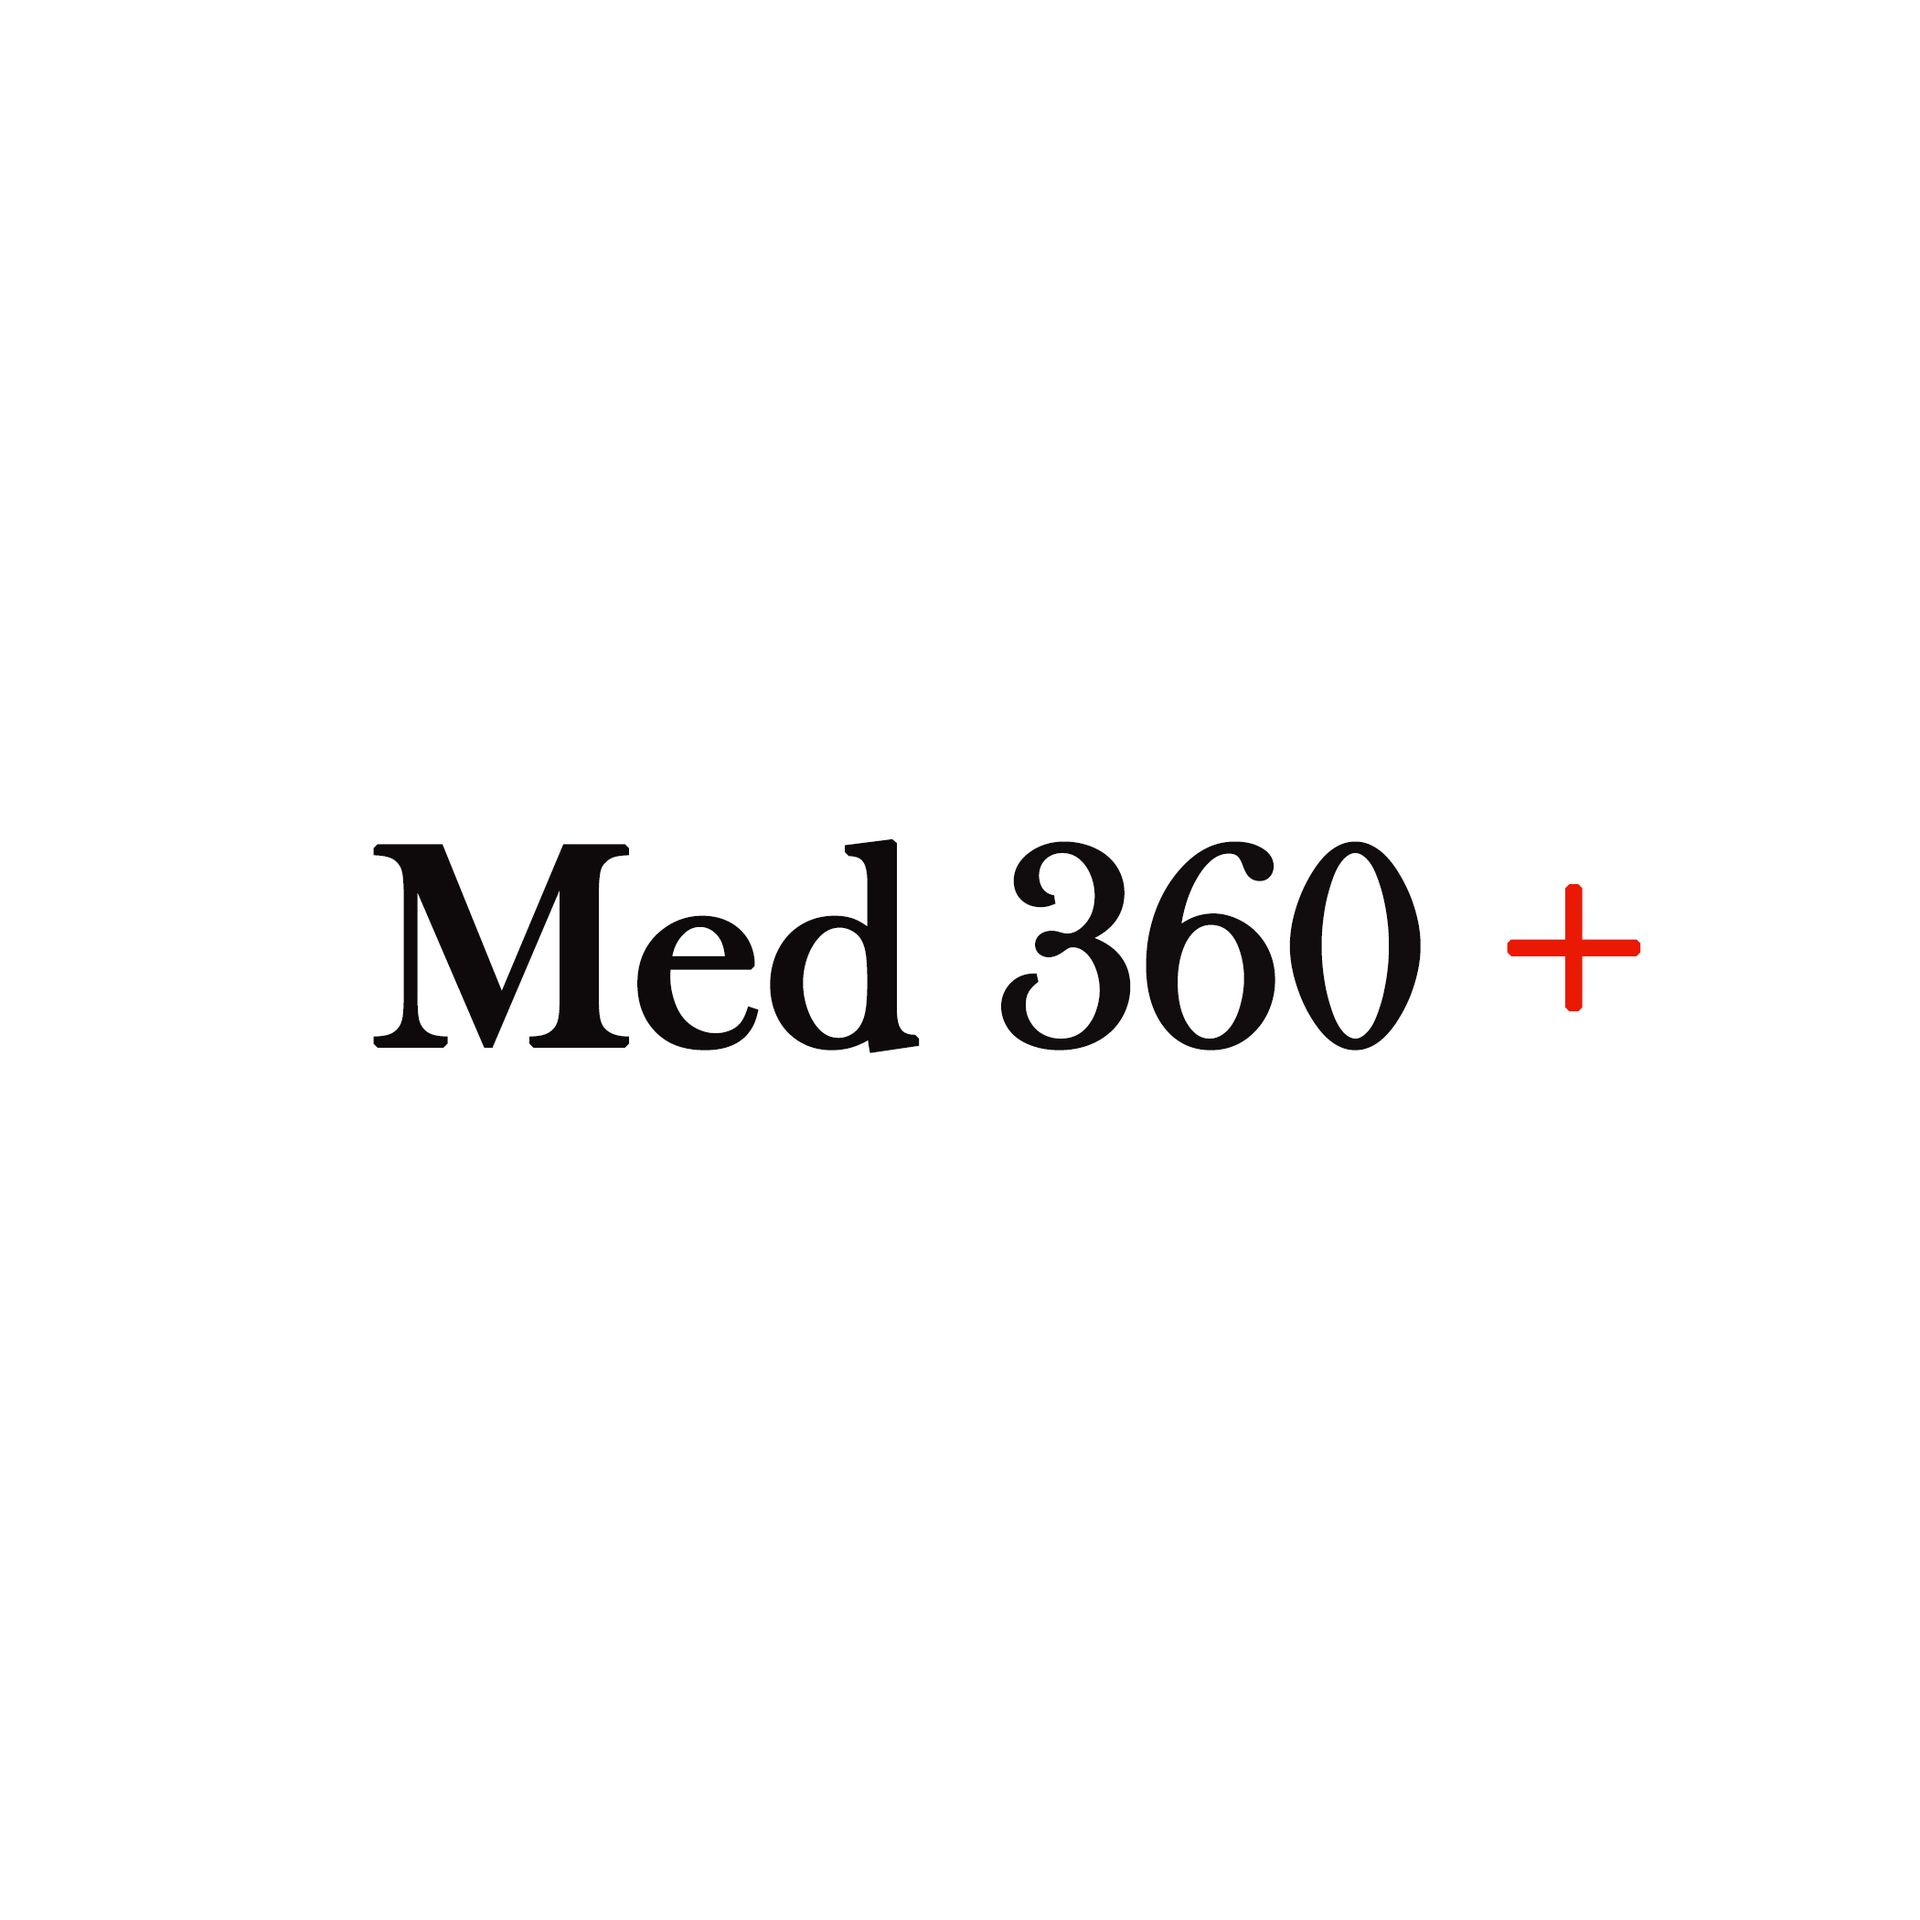 Product Brand: Med 360 +